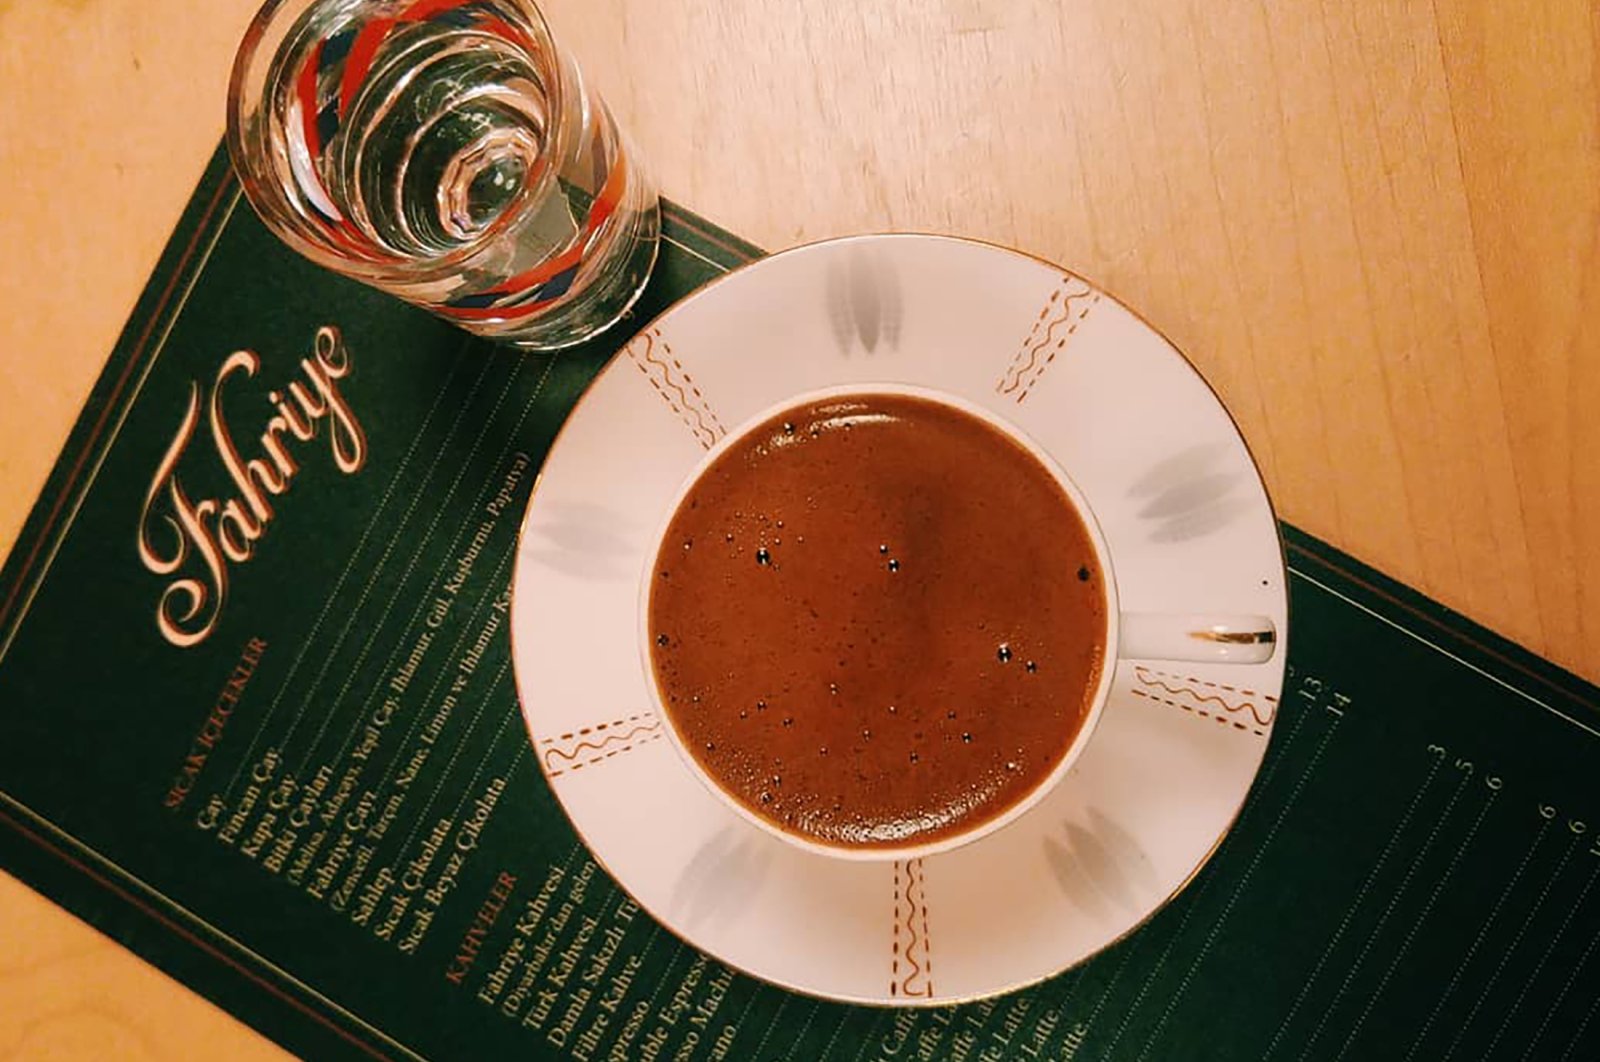 Turkish coffee and the menu at the Fahriye cafe in the Moda district, Istanbul, Turkey. (From Instagram / @fahriyecafe)